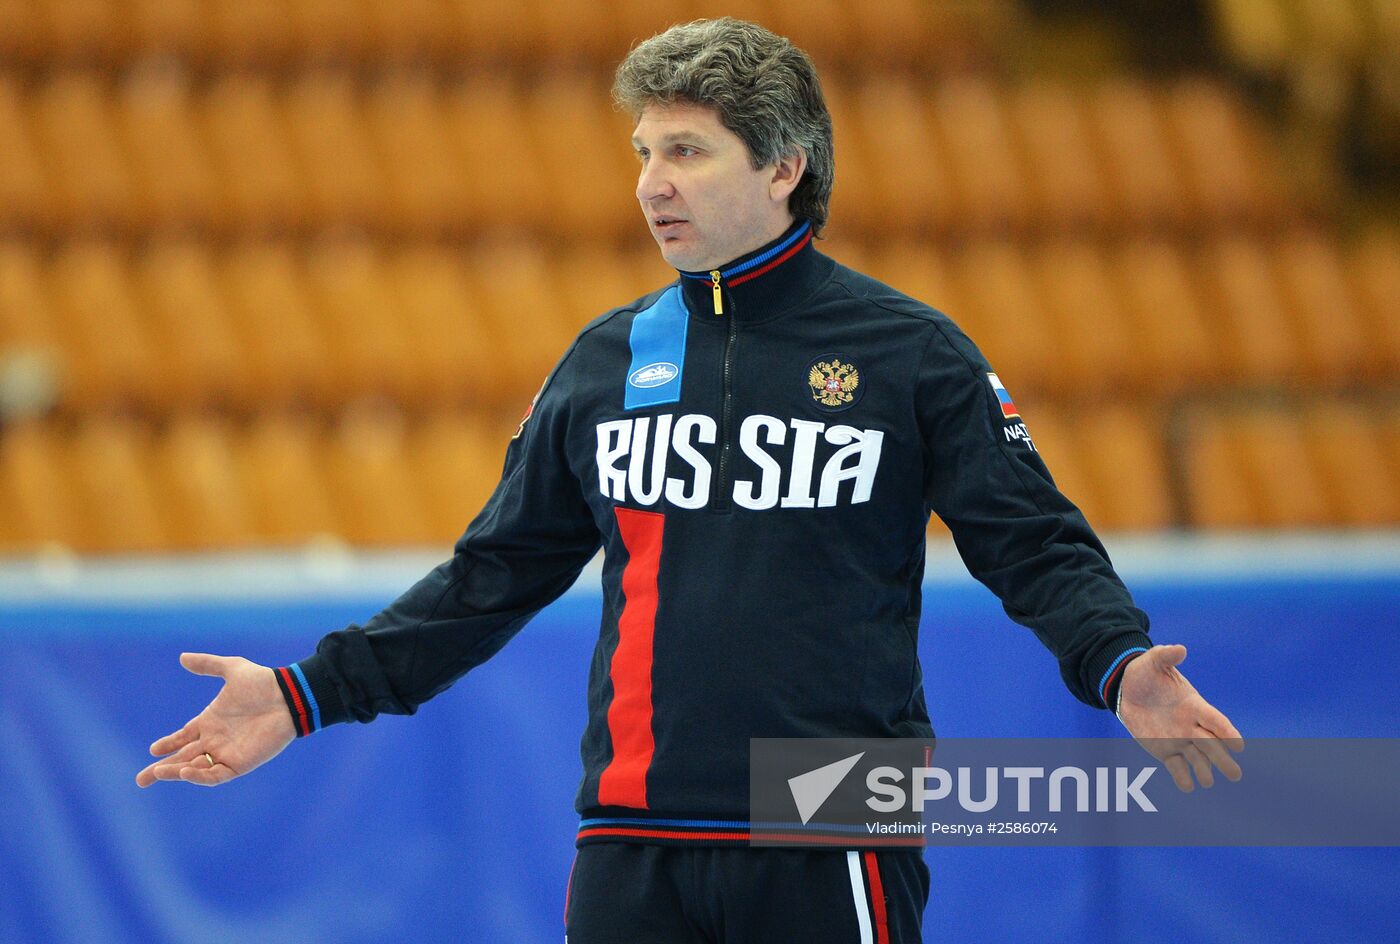 World Short Track Speed Skating Championships 2015 in Moscow. Training